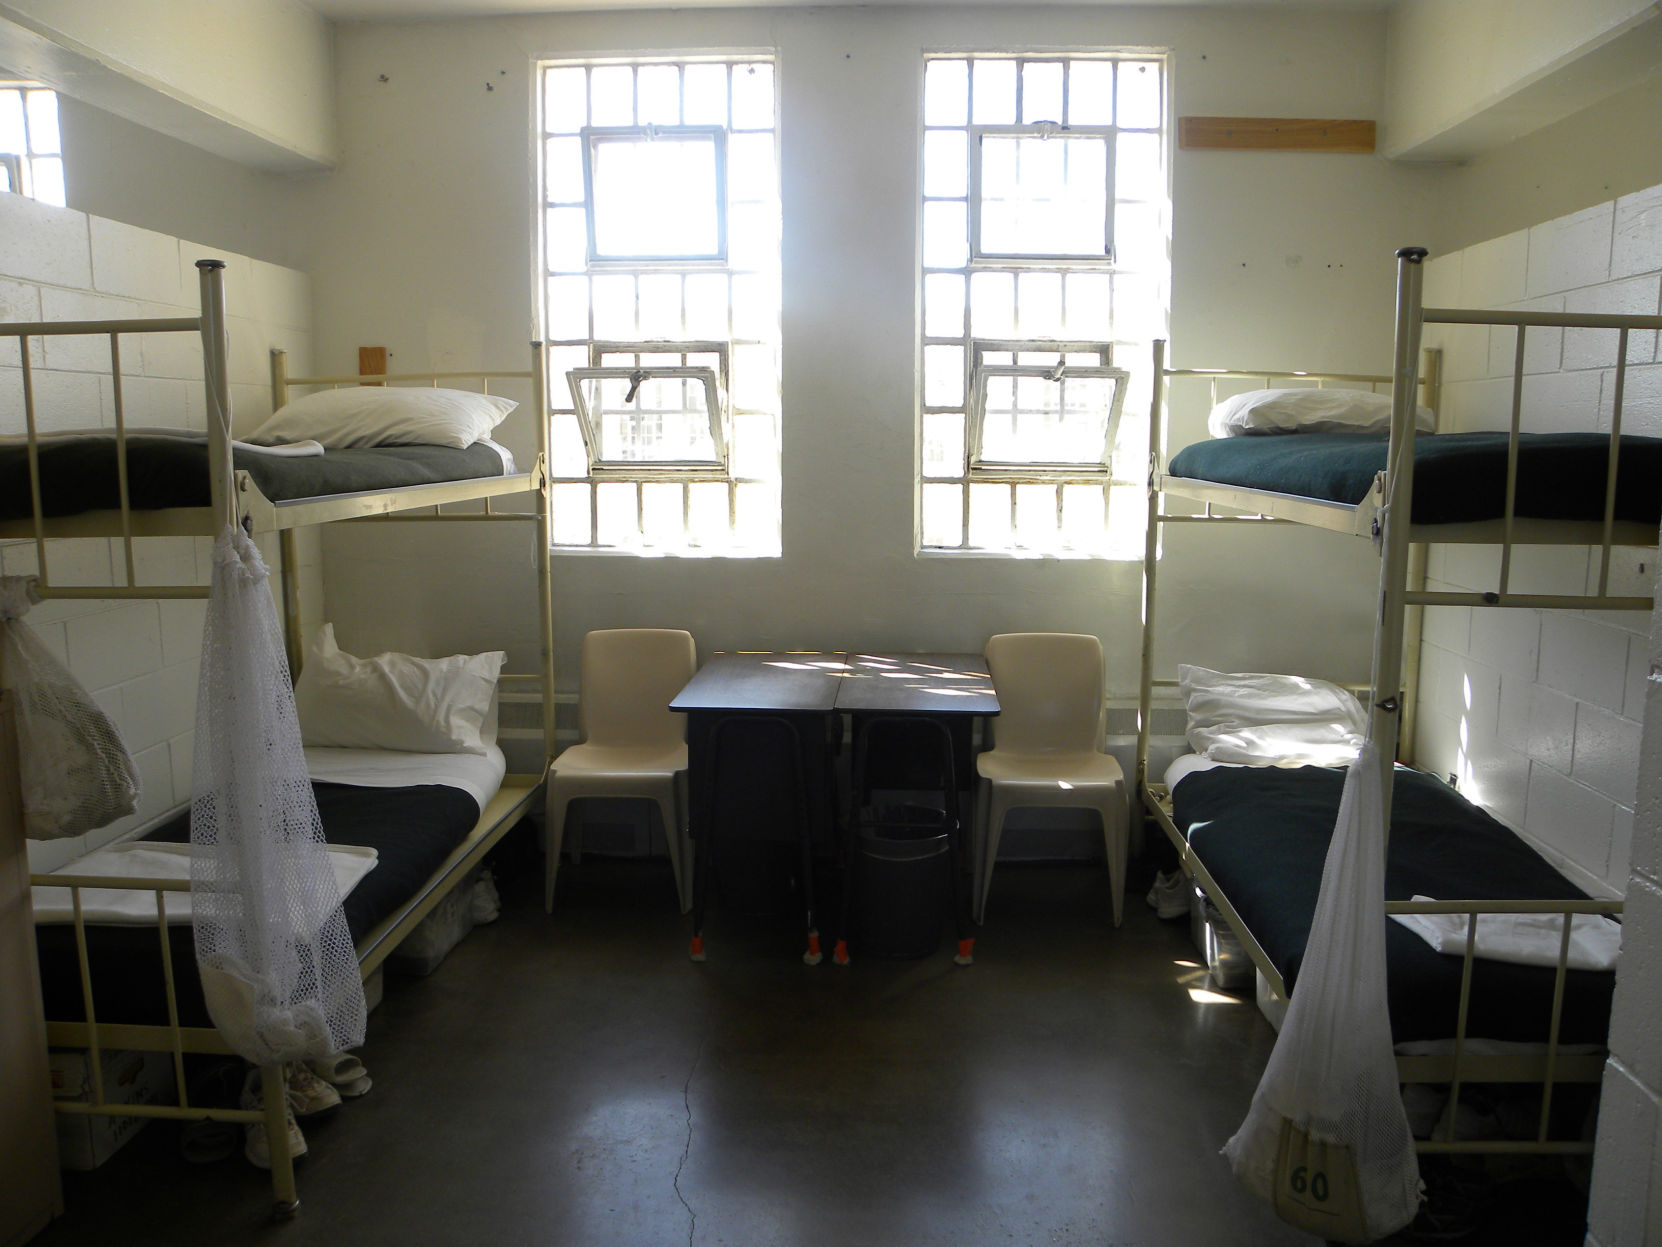 Colorado prison has one of the worst federal facility outbreaks in US Dg-print gazette image